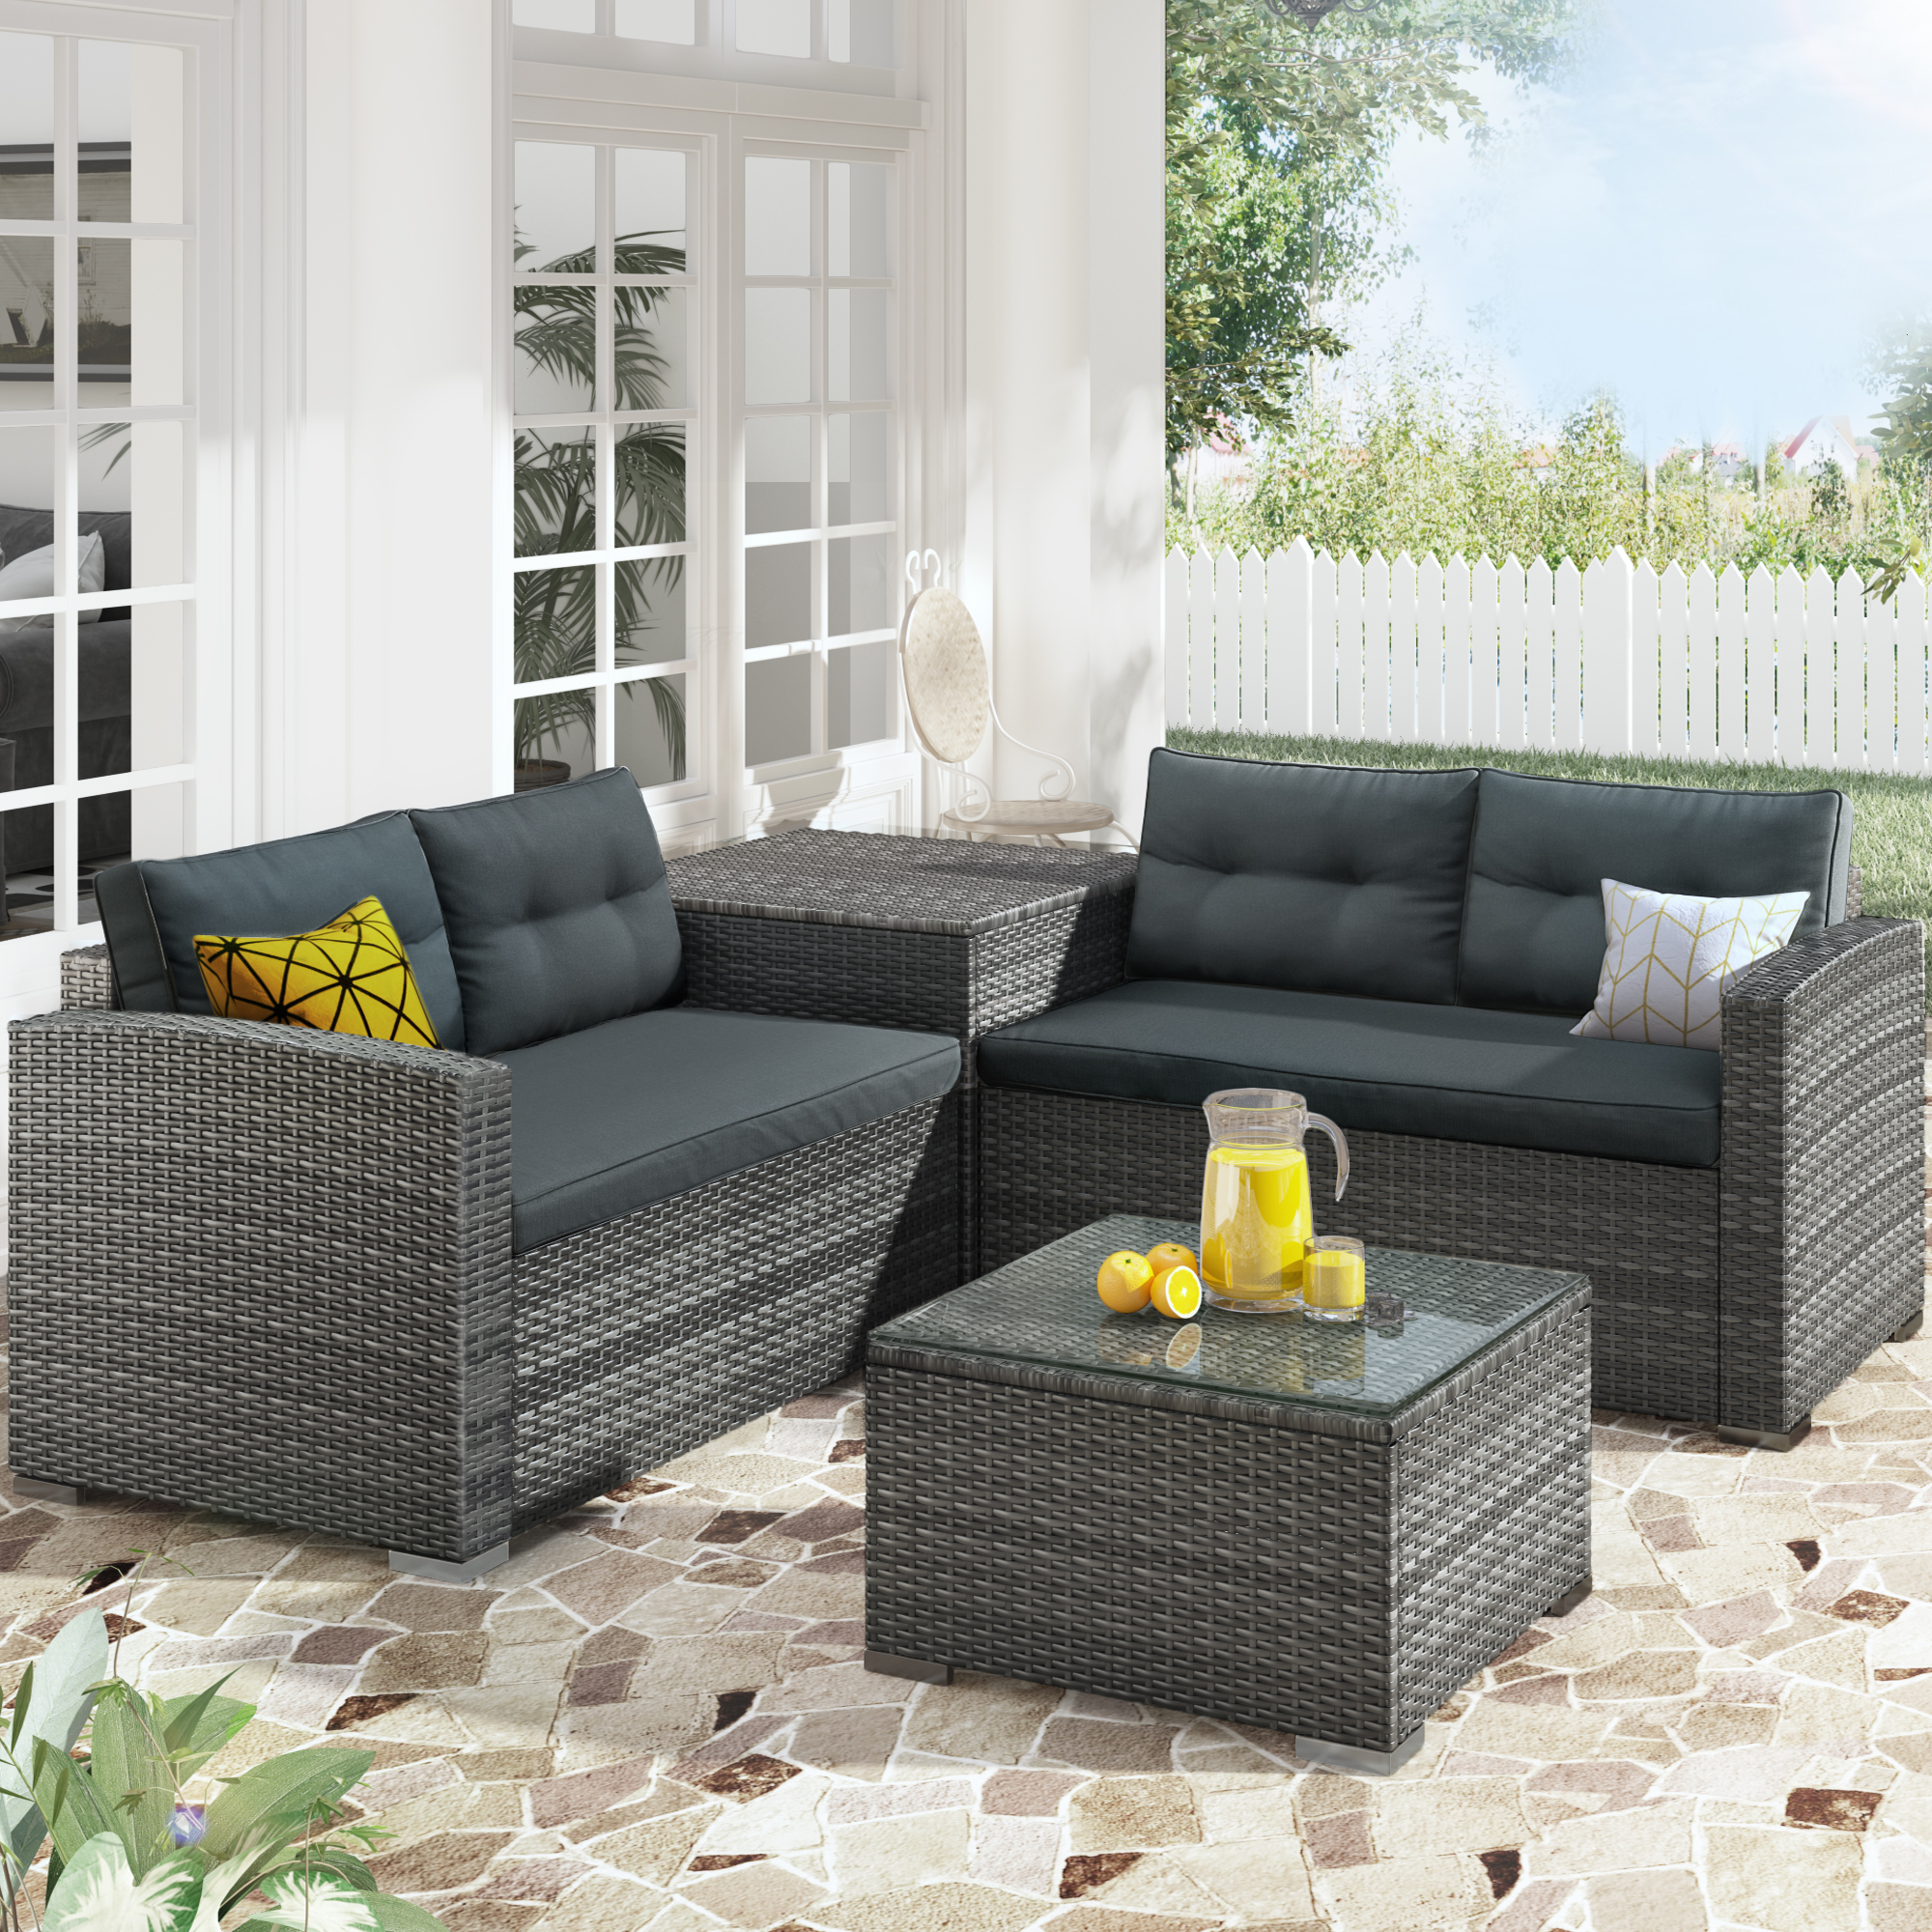 UHOMEPRO Outdoor Patio Furniture Set, 4-Piece PE Rattan Wicker Patio Dining Table Set, Outdoor Conversation Sets with Glass Coffee Table, Patio Bistro Set for Backyard Porch Garden Poolside, Q13783 - image 2 of 12